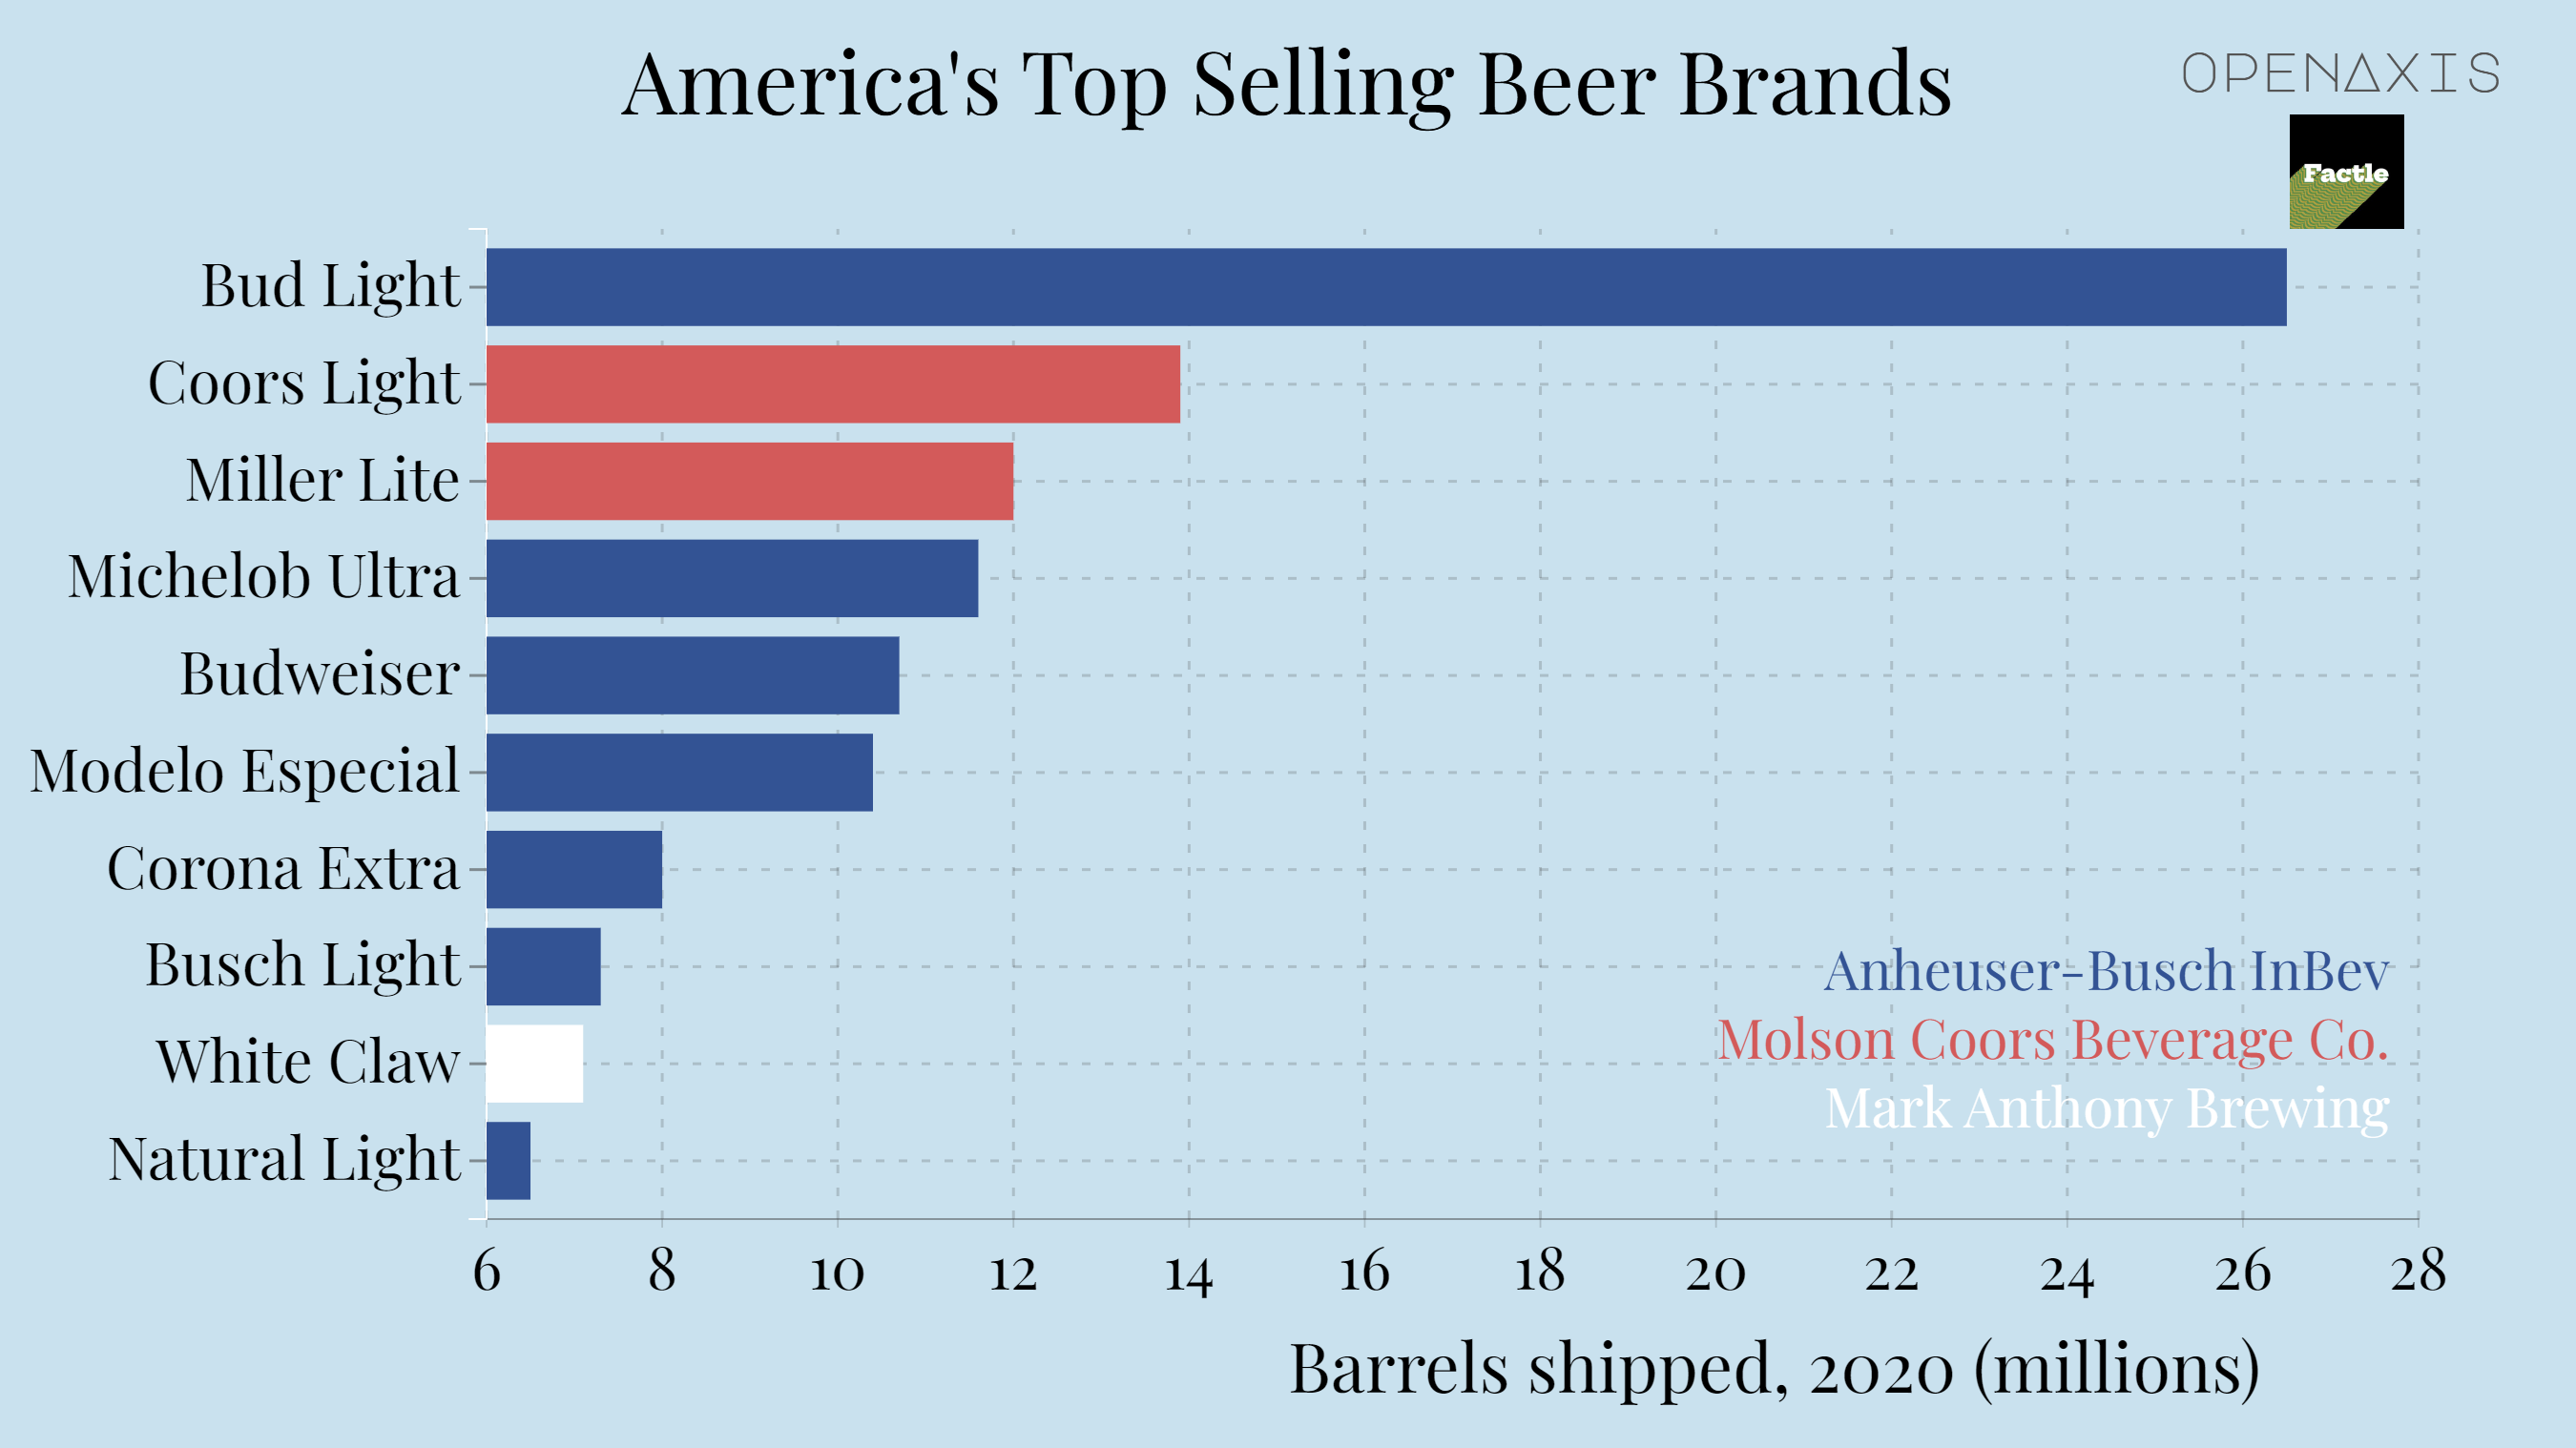 <p>The average American adult consumes about 28 gallons of beer annually — about a six-pack a week — according to Beer Institute, a national trade organization representing the brewing industry.</p><p><br /></p><p>Despite the rise of the microbrewing industry, at least three-quarters of the beer consumed in the U.S. is still produced by giants like Belgium-based Anheuser-Busch InBev (the world’s largest beer company) and Molson Coors Beverage Company, headquartered in Golden, Colorado and Montreal. Between them, in fact, they represent more than two-thirds of the beers on this list.</p><p><br /></p><p><span data-index="0" data-denotation-char data-id="0" data-value="&lt;a href=&quot;/search?q=%23alcohol&quot; target=_self&gt;#alcohol" data-link="/search?q=%23alcohol">﻿<span contenteditable="false"><span></span><a href="/search?q=%23alcohol" target="_self">#alcohol</a></span>﻿</span> <span data-index="0" data-denotation-char data-id="0" data-value="&lt;a href=&quot;/search?q=%23brands&quot; target=_self&gt;#brands" data-link="/search?q=%23brands">﻿<span contenteditable="false"><span></span><a href="/search?q=%23brands" target="_self">#brands</a></span>﻿</span> </p><p><br /></p><p>Source: <a href="http:///data/3763" target="_blank">24/7 Wall Street, Beer Marketer’s Insights</a></p><p><br /></p>